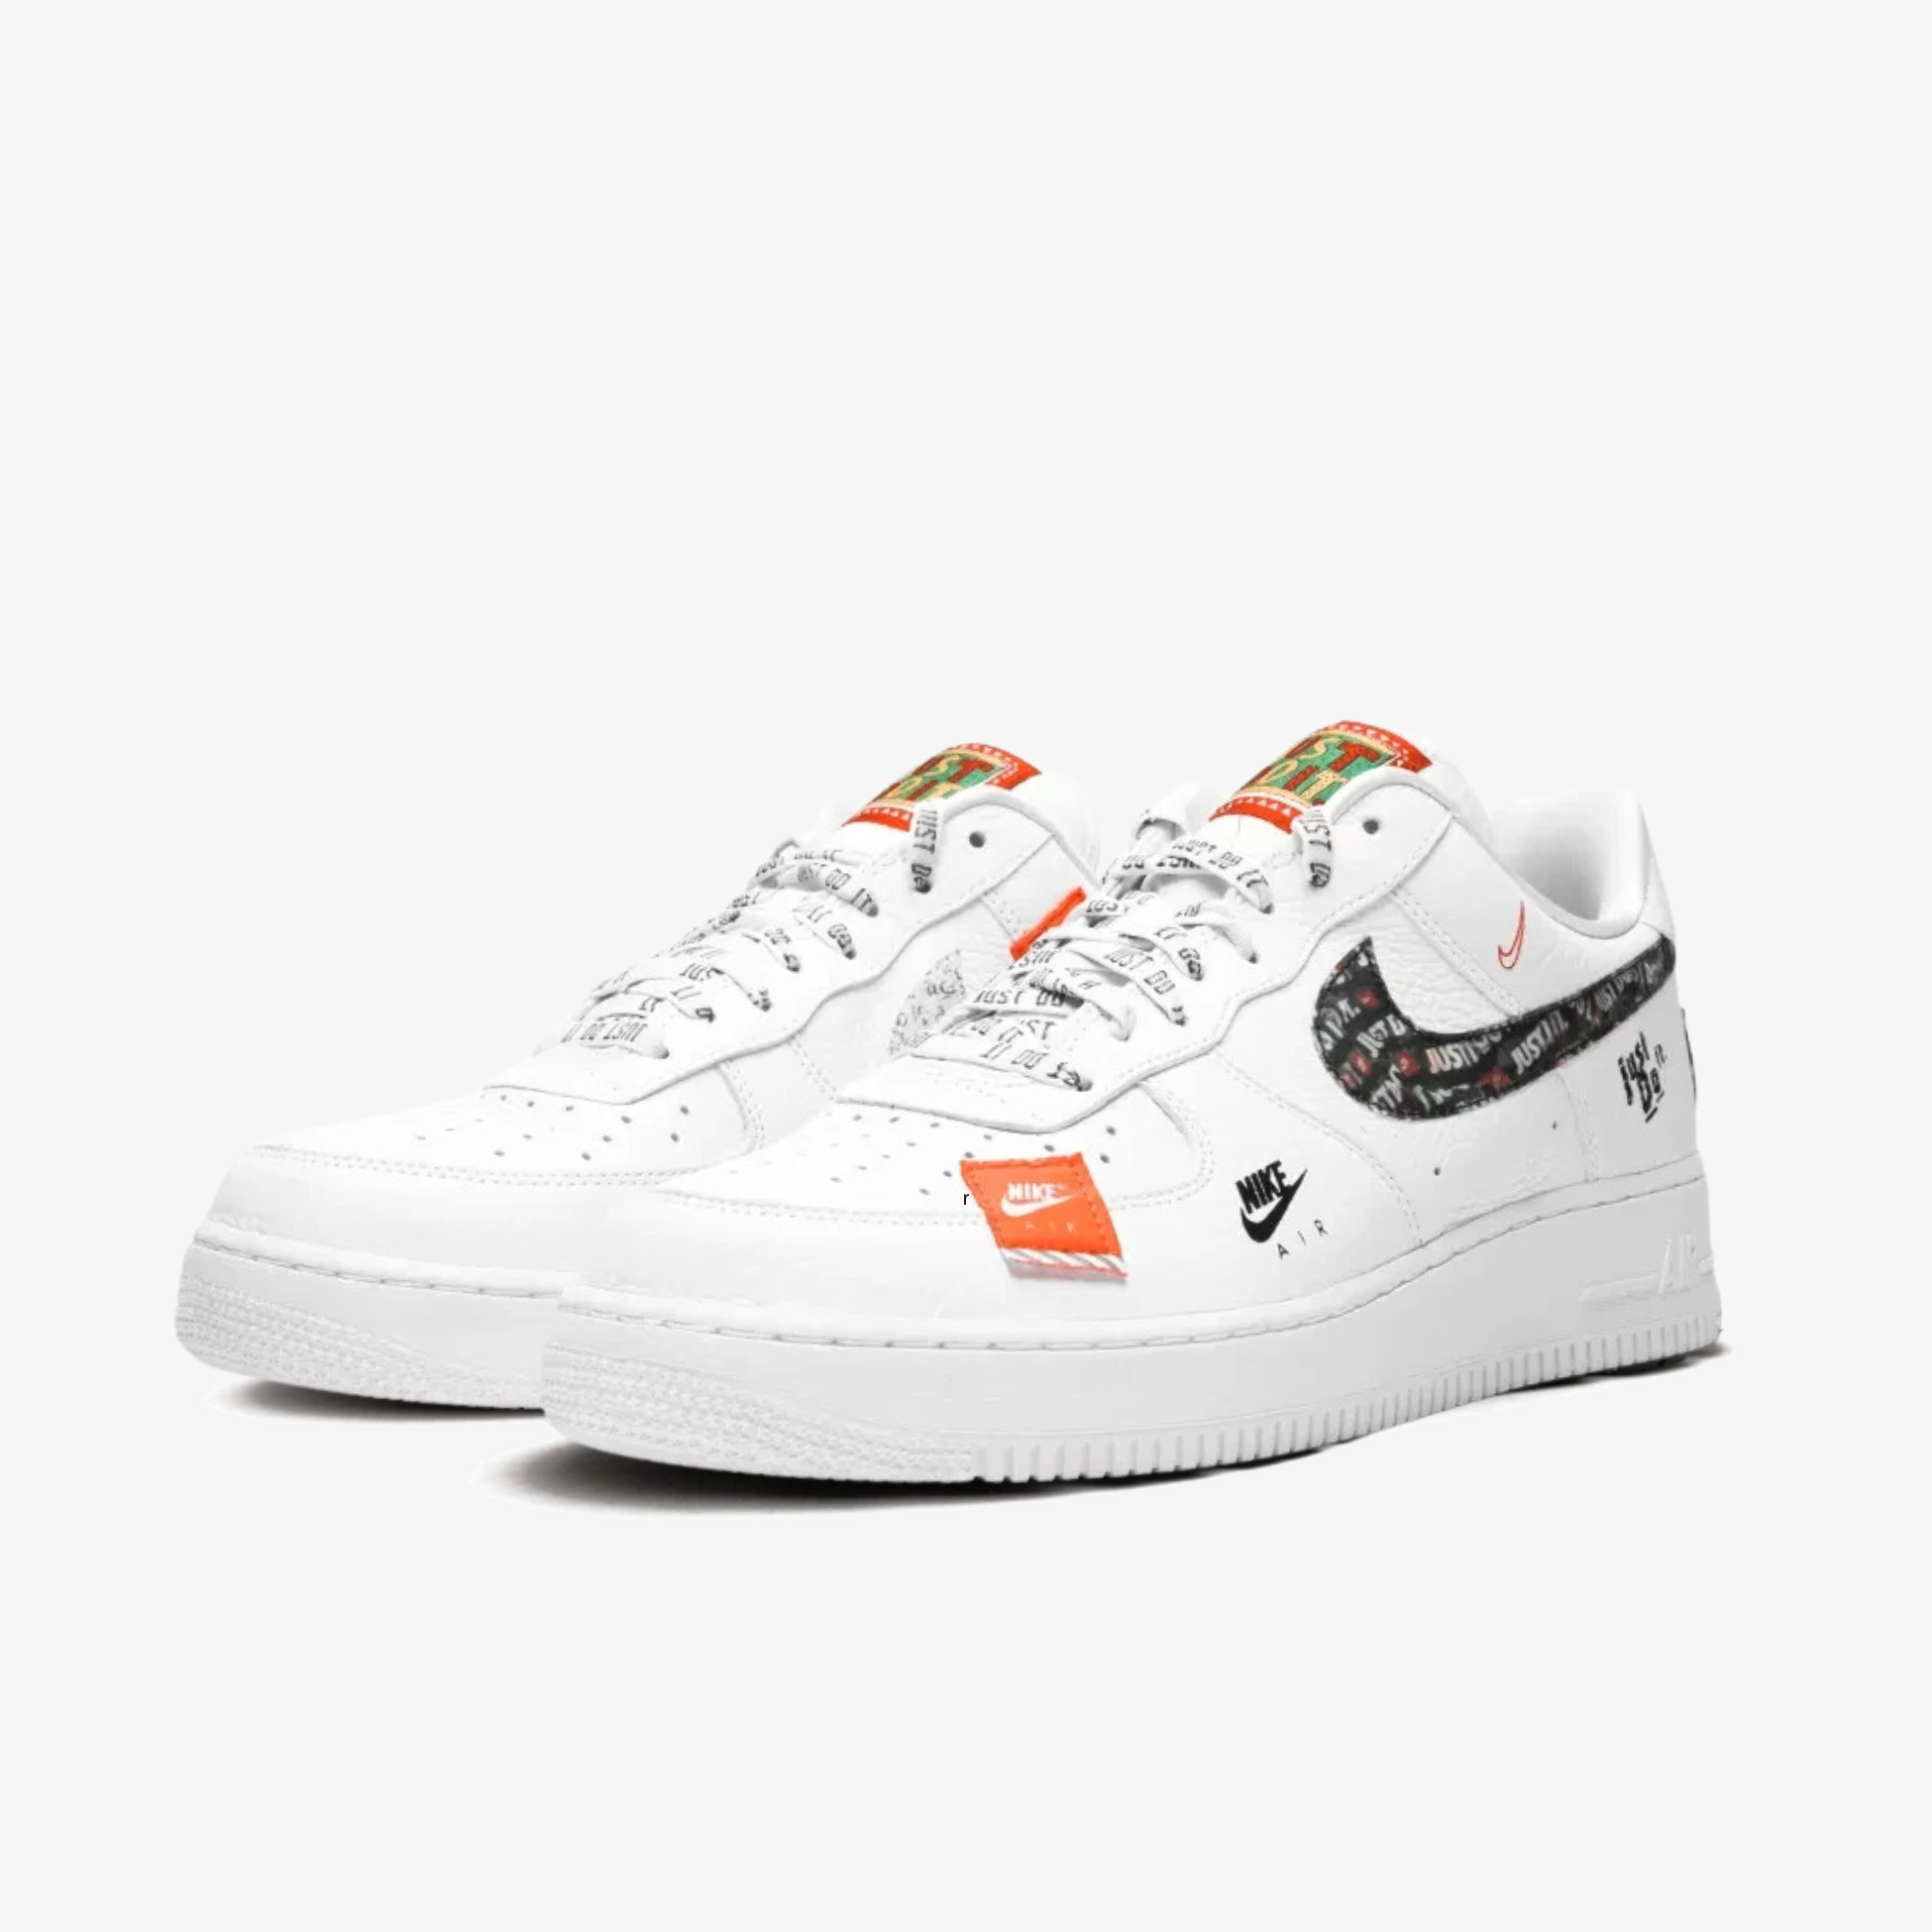 Nike Air Force 1 '07 PRM "Just Do It" Wit